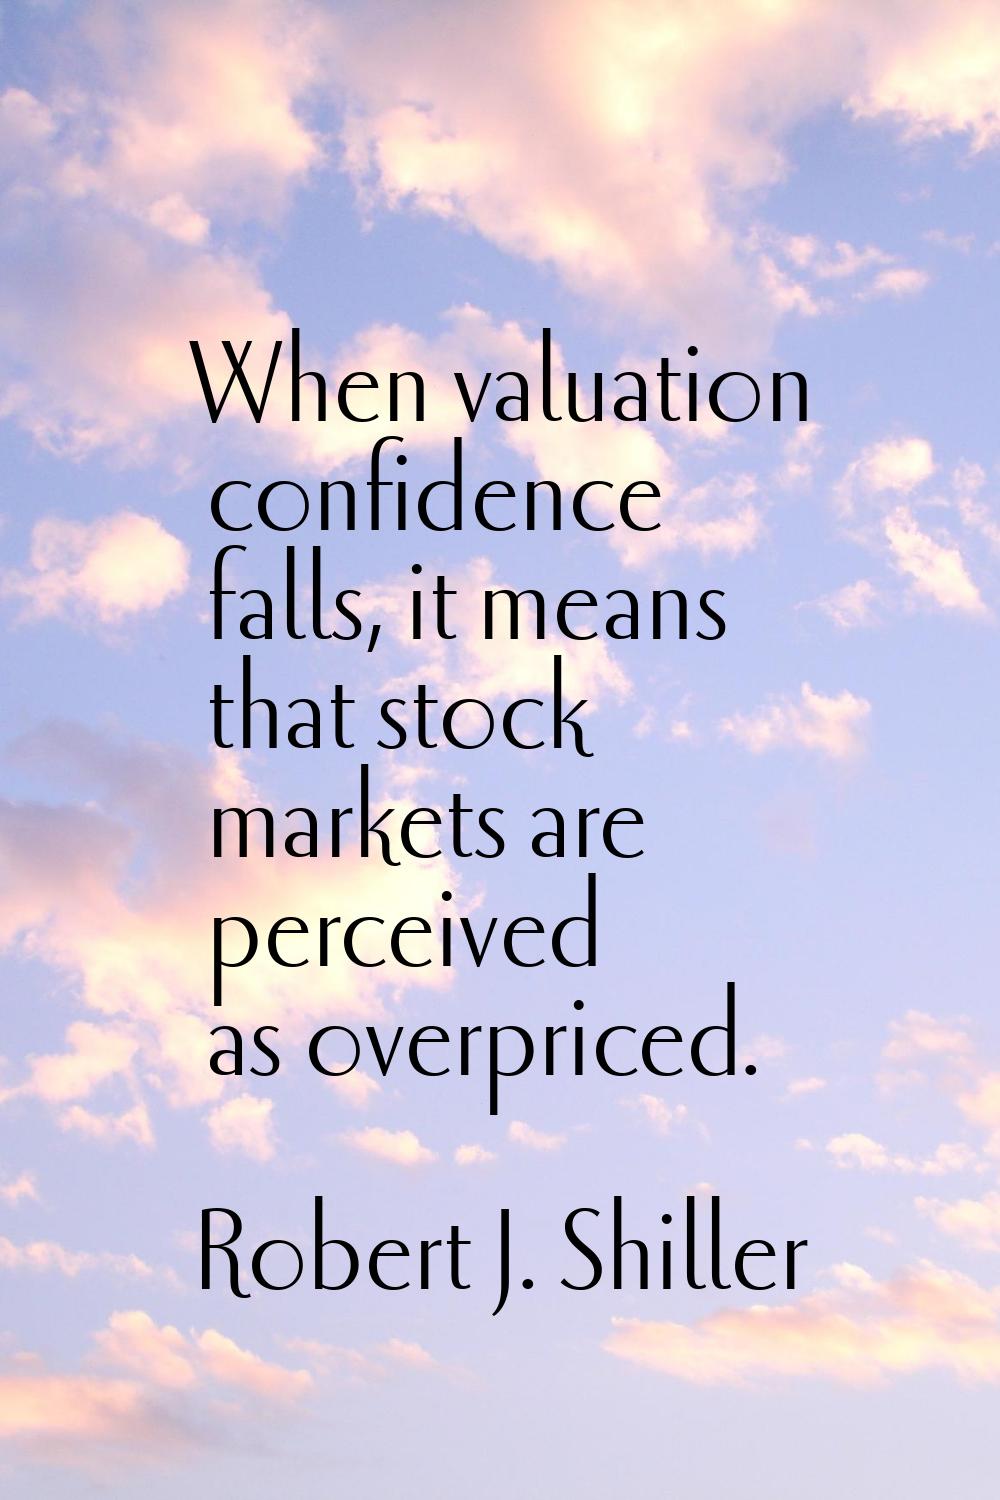 When valuation confidence falls, it means that stock markets are perceived as overpriced.